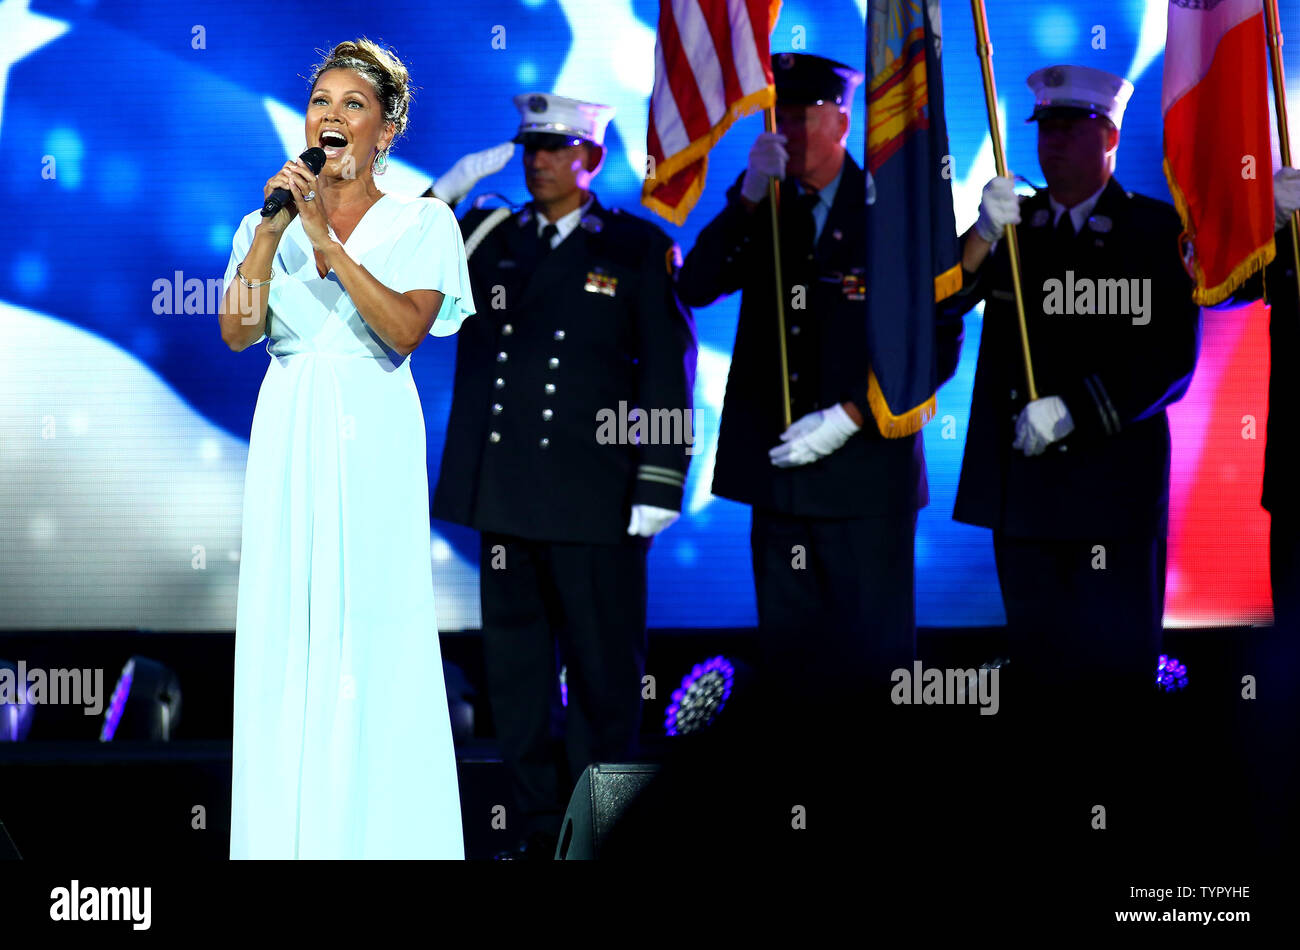 Vanessa Williams performs during the Opening Night Ceremony at the US Open Tennis Championships at the USTA Billie Jean King National Tennis Center in New York City on August 31, 2015.     UPI/Monika Graff Stock Photo